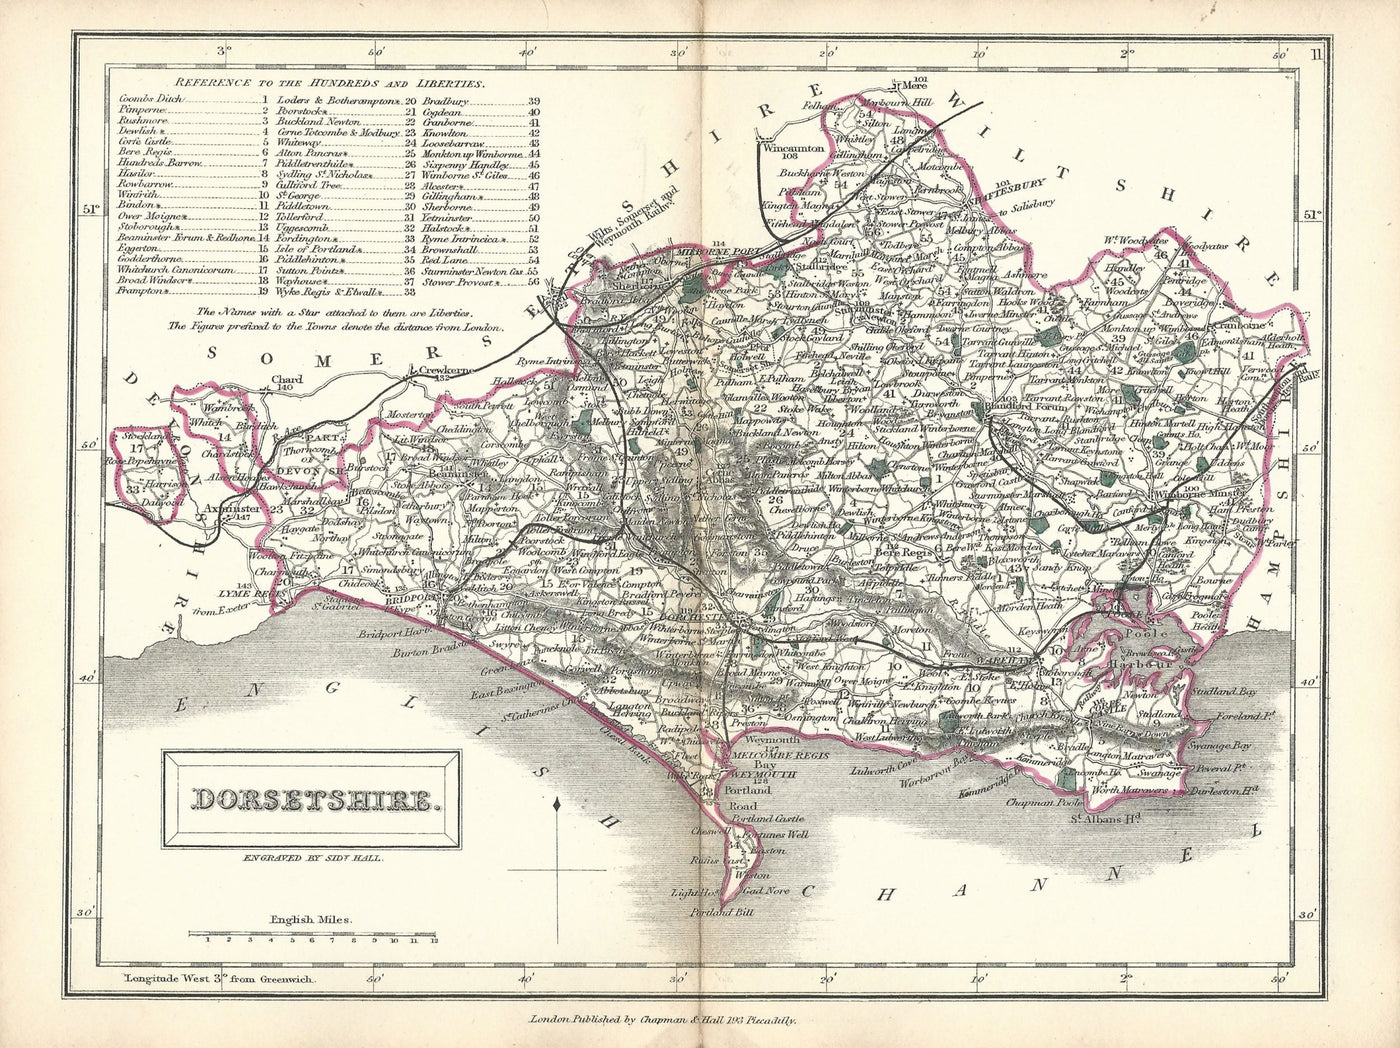 Dorset Dorsetshire antique map from English Counties by Sidney Hall published 1860